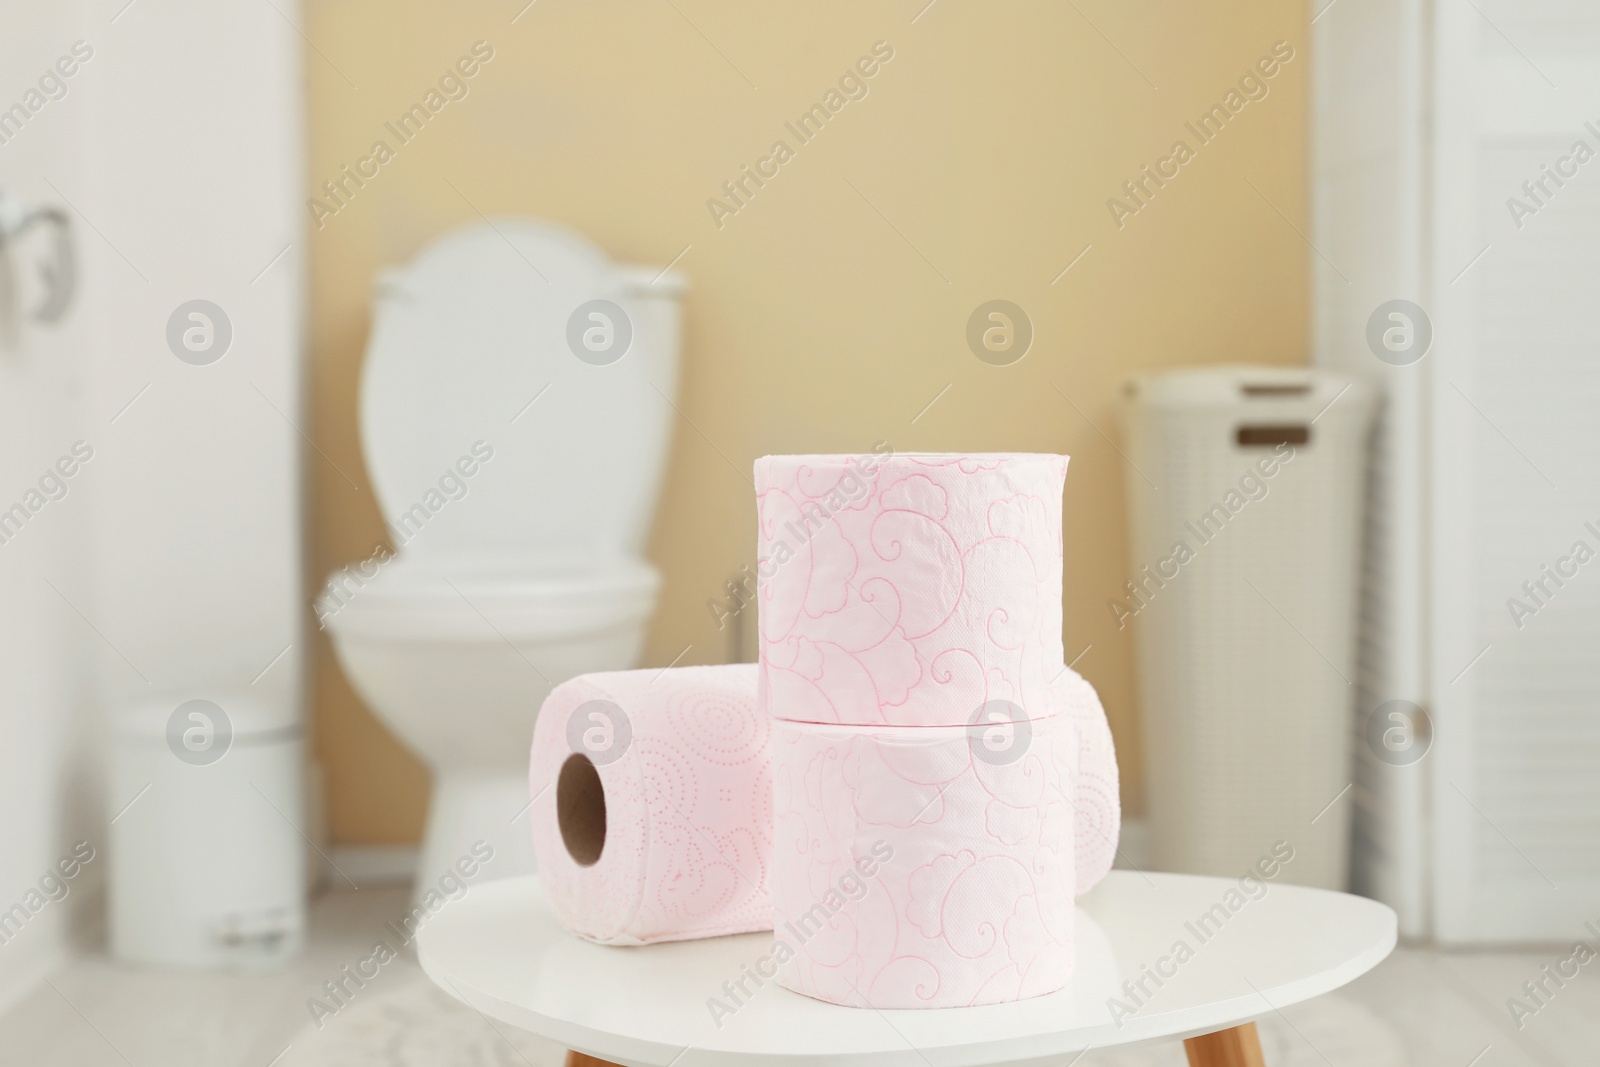 Photo of Toilet paper rolls on table in bathroom